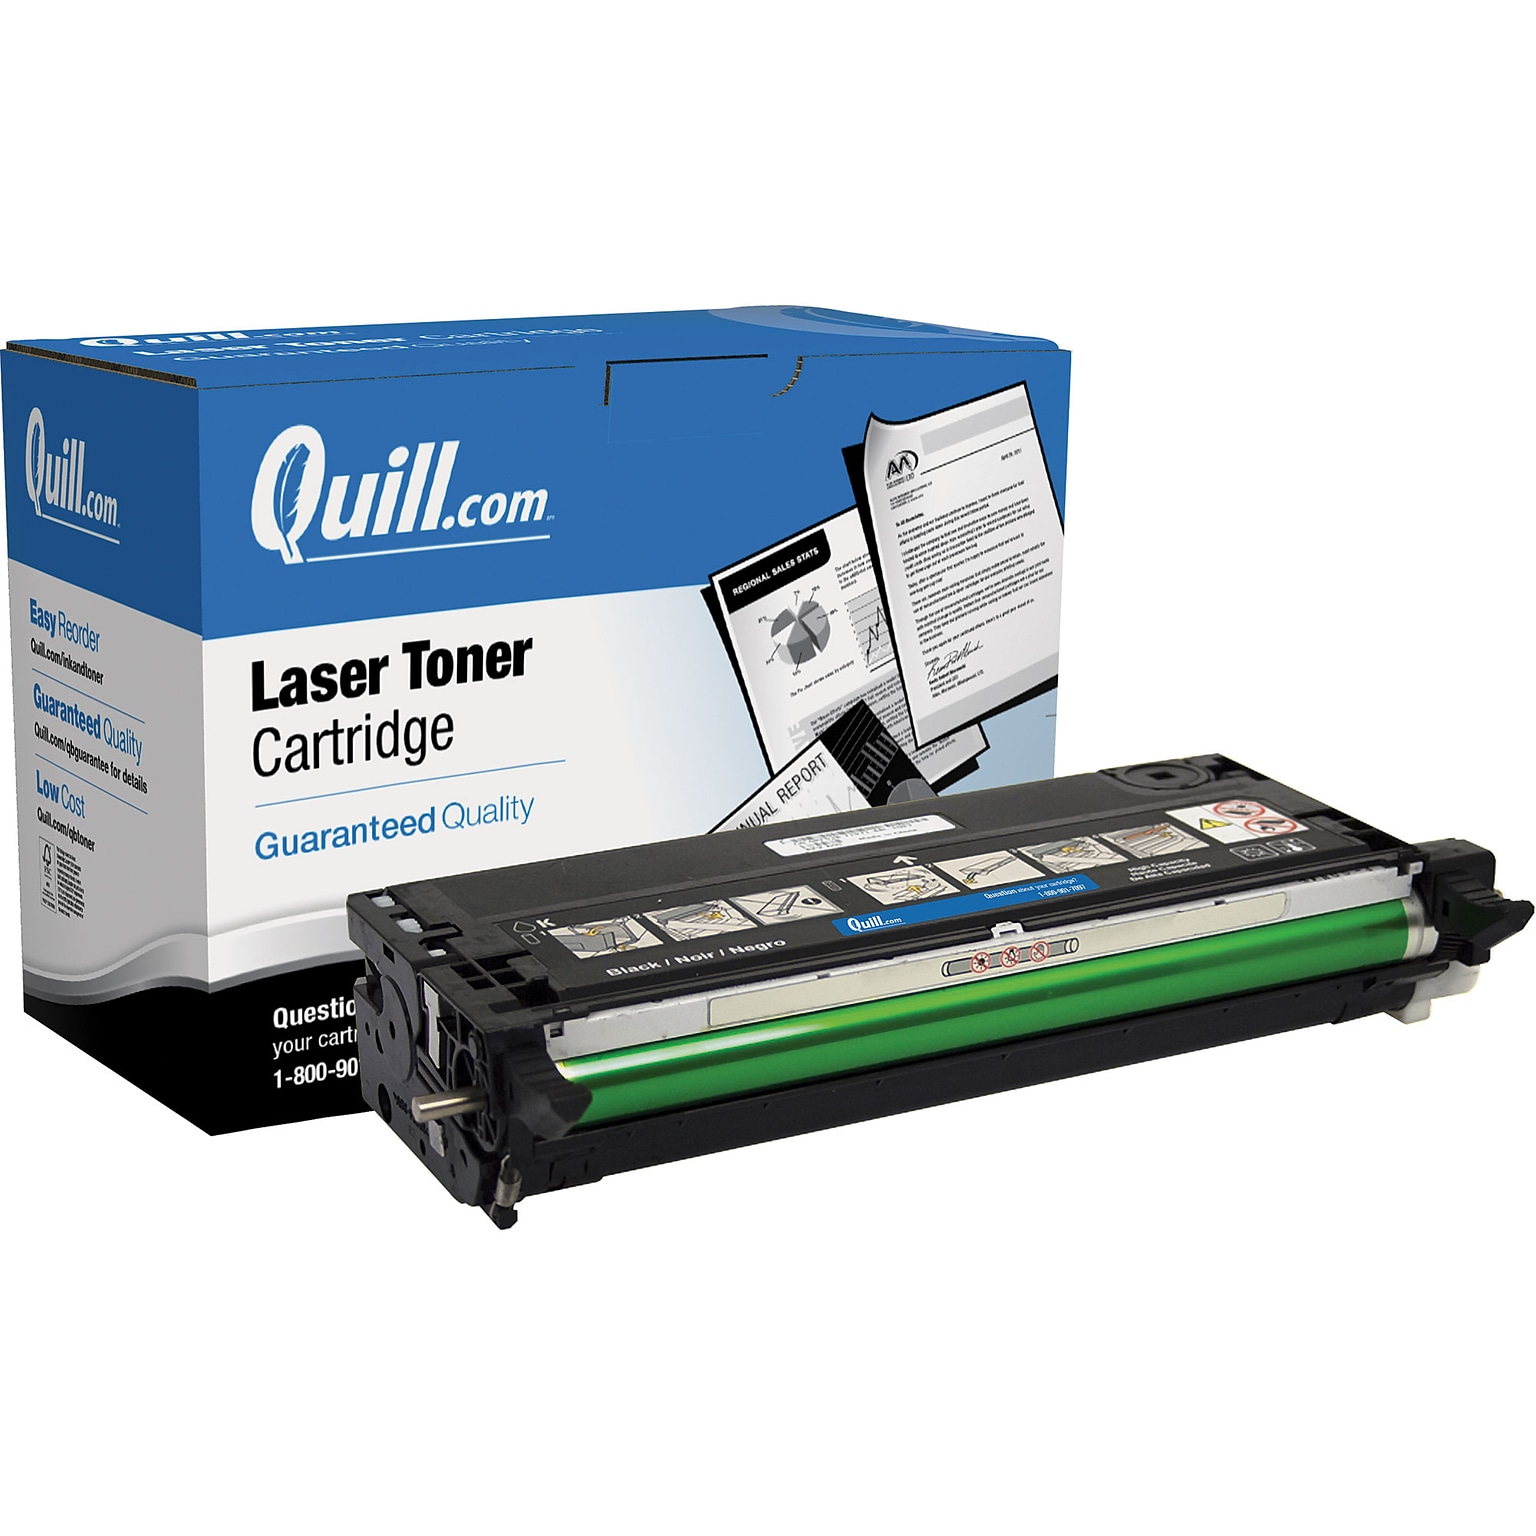 Quill Brand Remanufactured Laser Toner Cartridge for Dell™ 3110CN and 3115CN High Yield Black (100% Satisfaction Guaranteed)